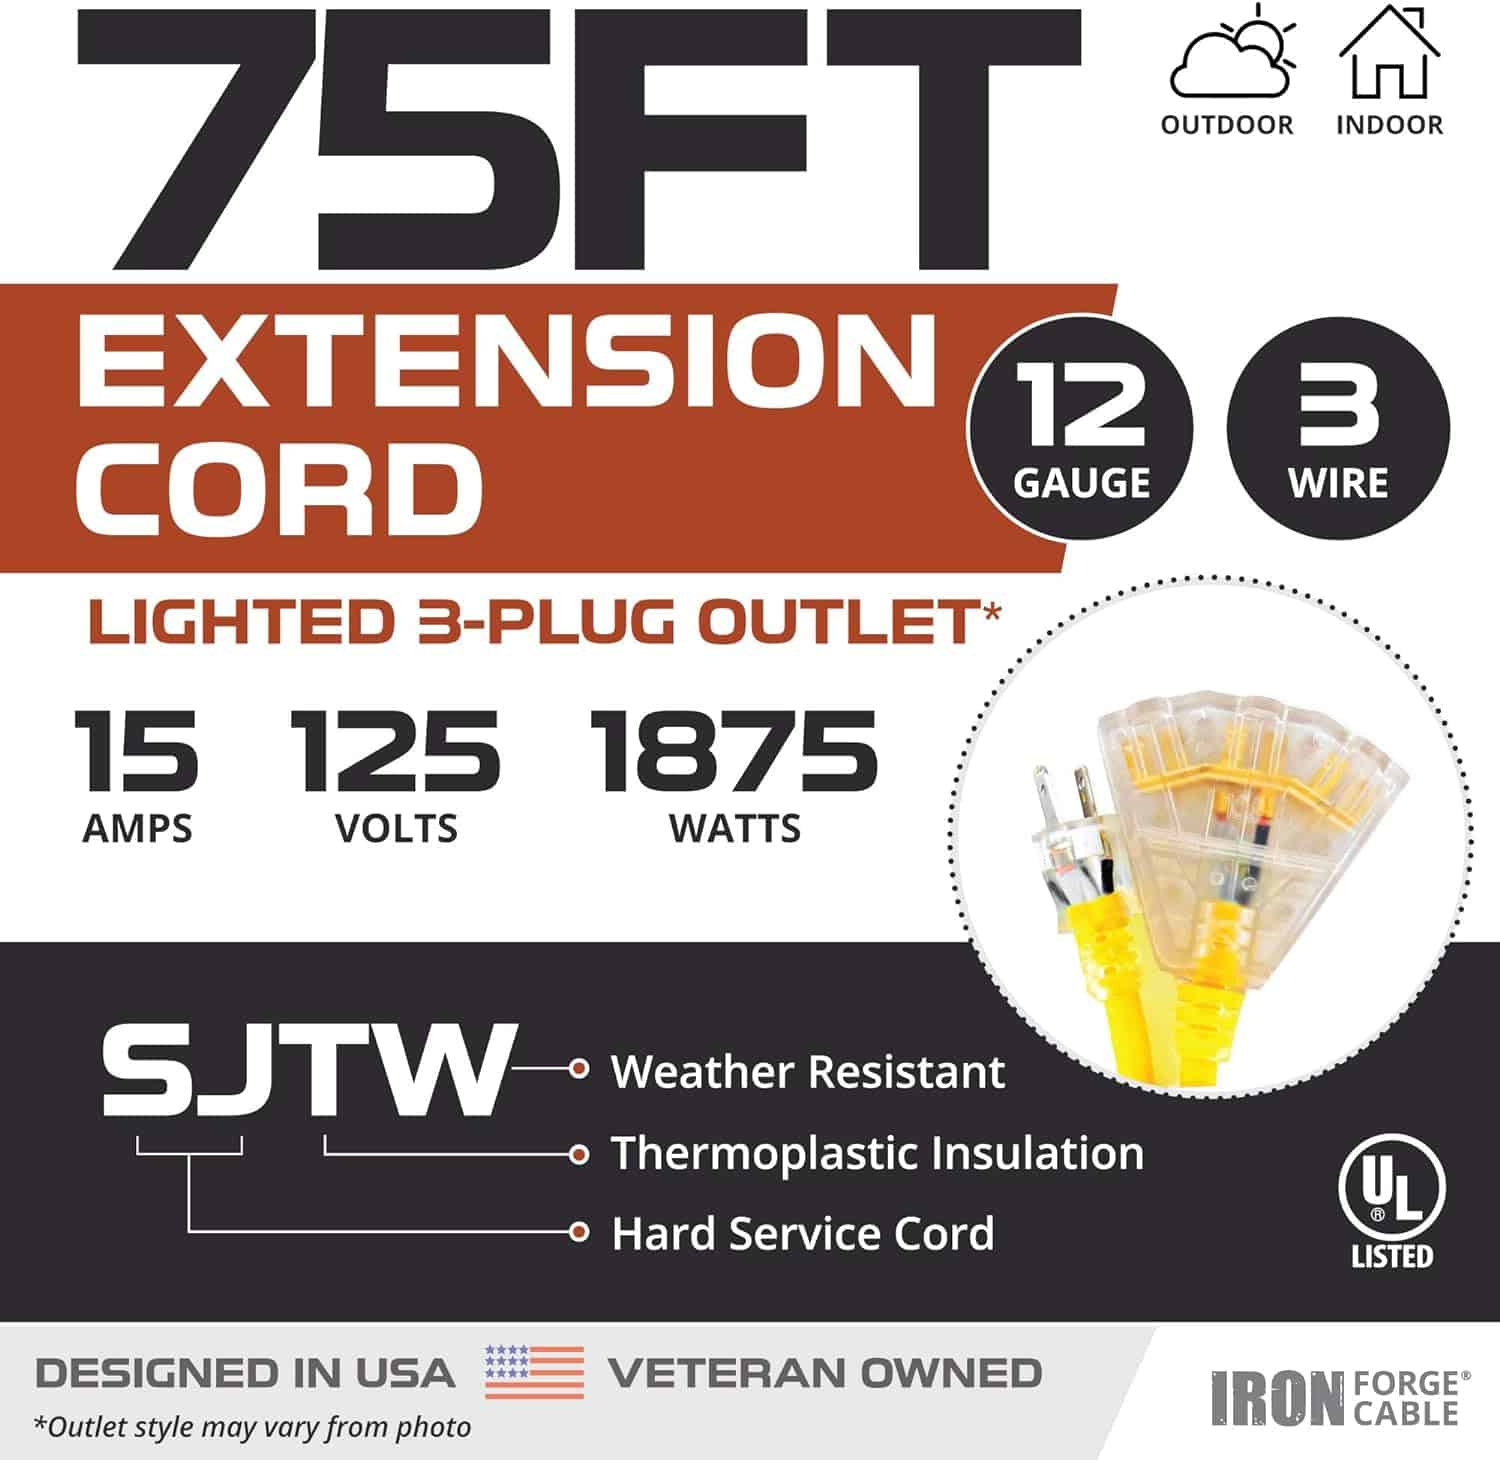 IRON-FORGE-CABLE-75-Foot-Lighted-Outdoor-Extension-Cord-with-3-Electrical-Power-Outlets-12-3-SJT-Heavy-Duty-Yellow-Extension-Cable-with-3-Prong-Grounded-Plug-for-Safety-15-AMP